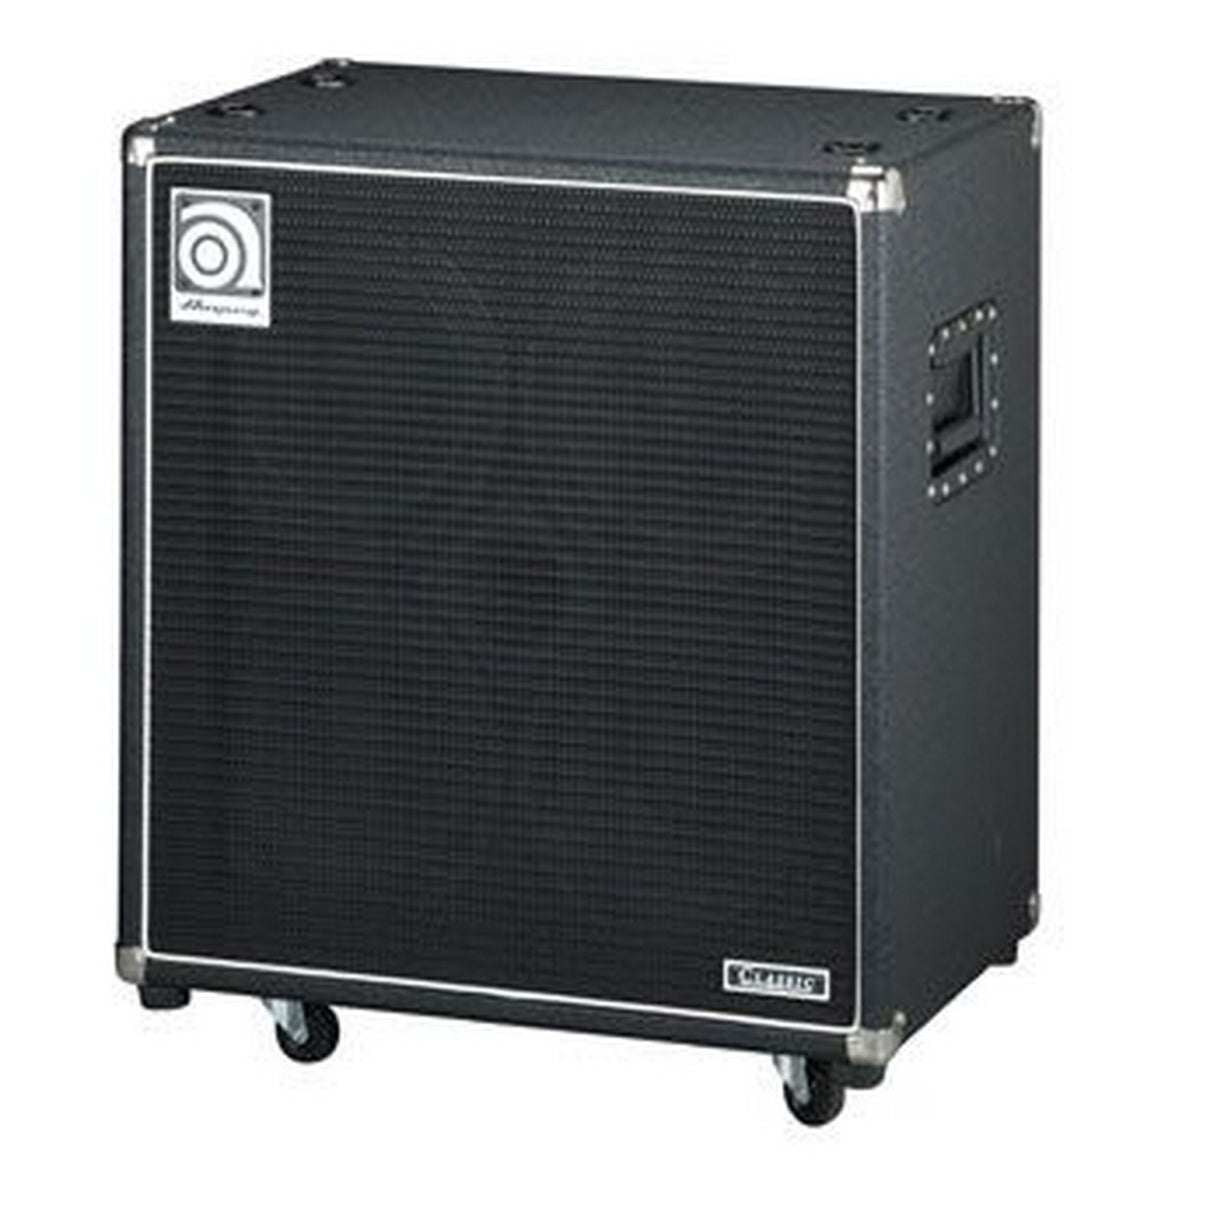 Ampeg SVT-410HE 4 x 10 Inch Bass Amp Cabinet